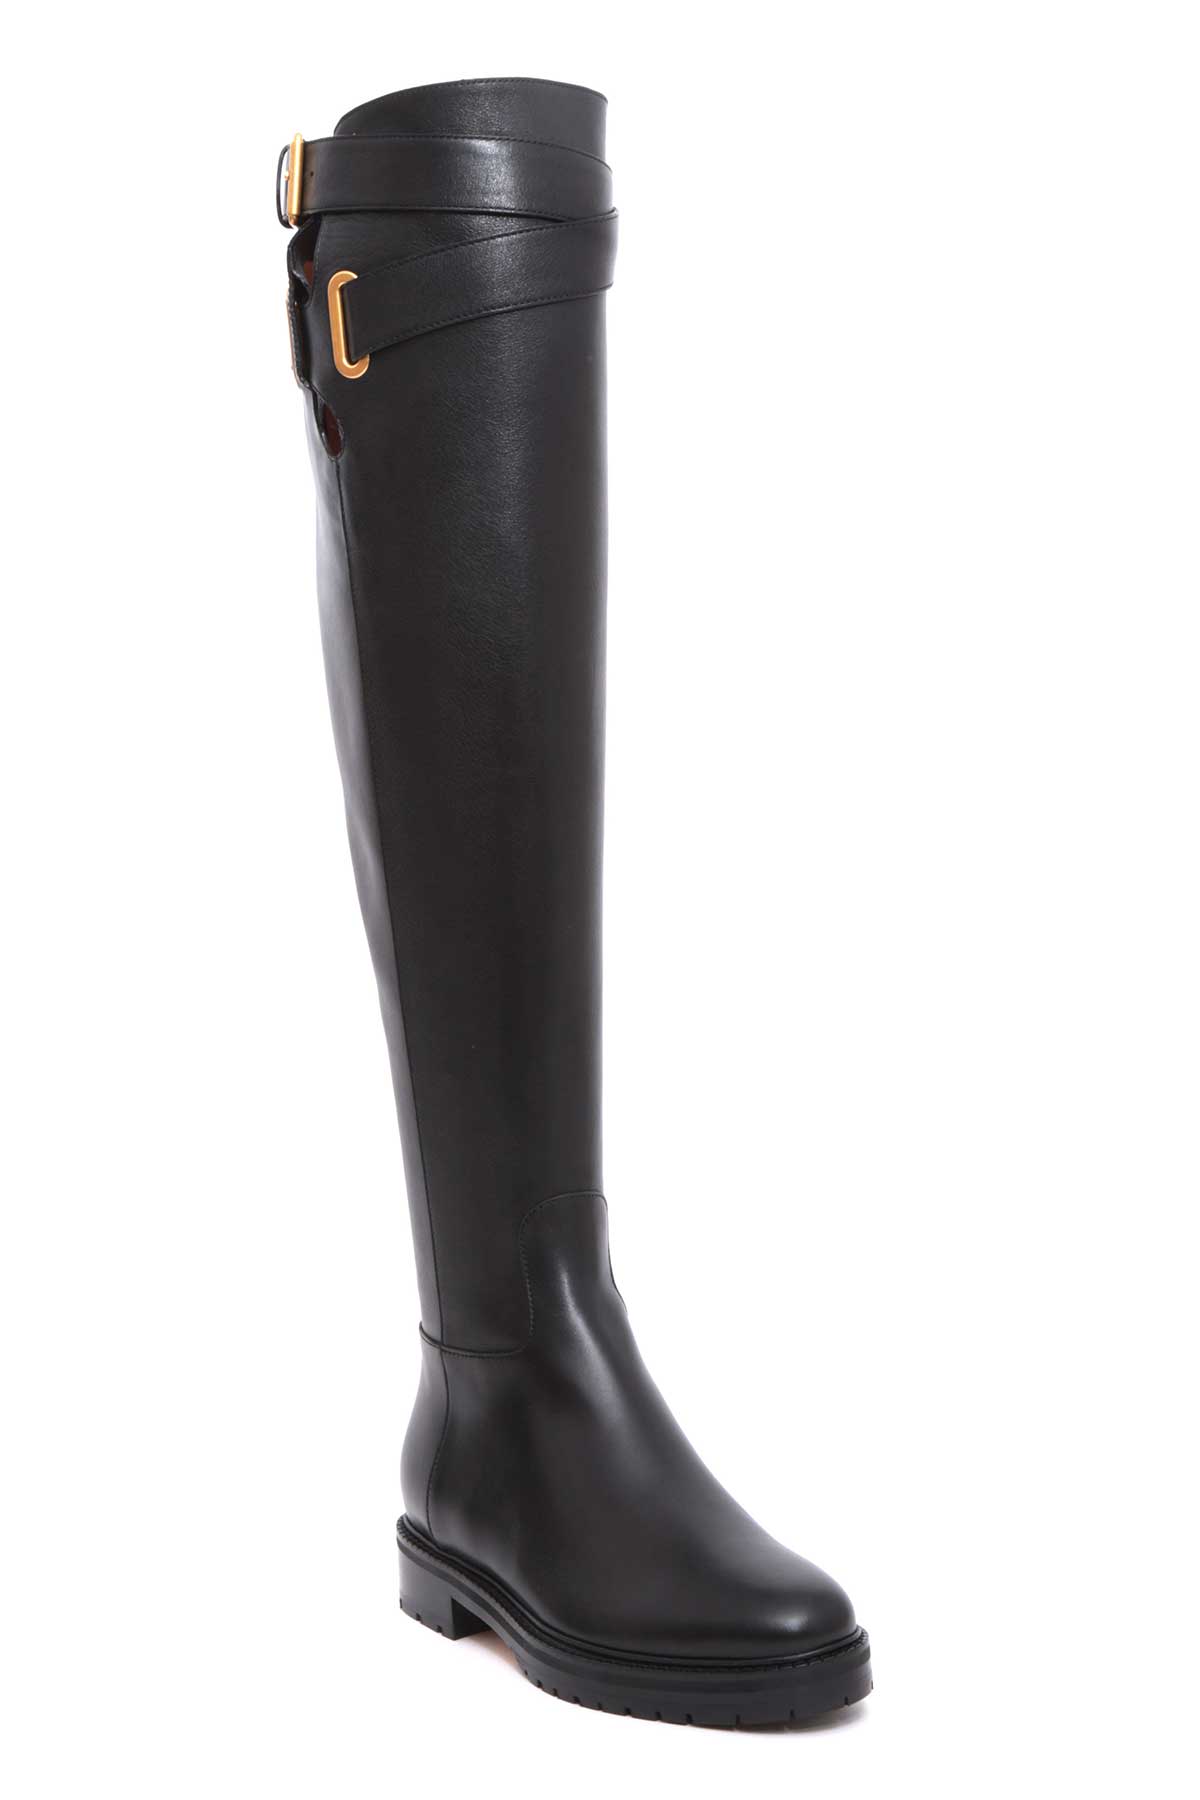 VALENTINO 30Mm Bowrap Leather Over The Knee Boots in Black | ModeSens